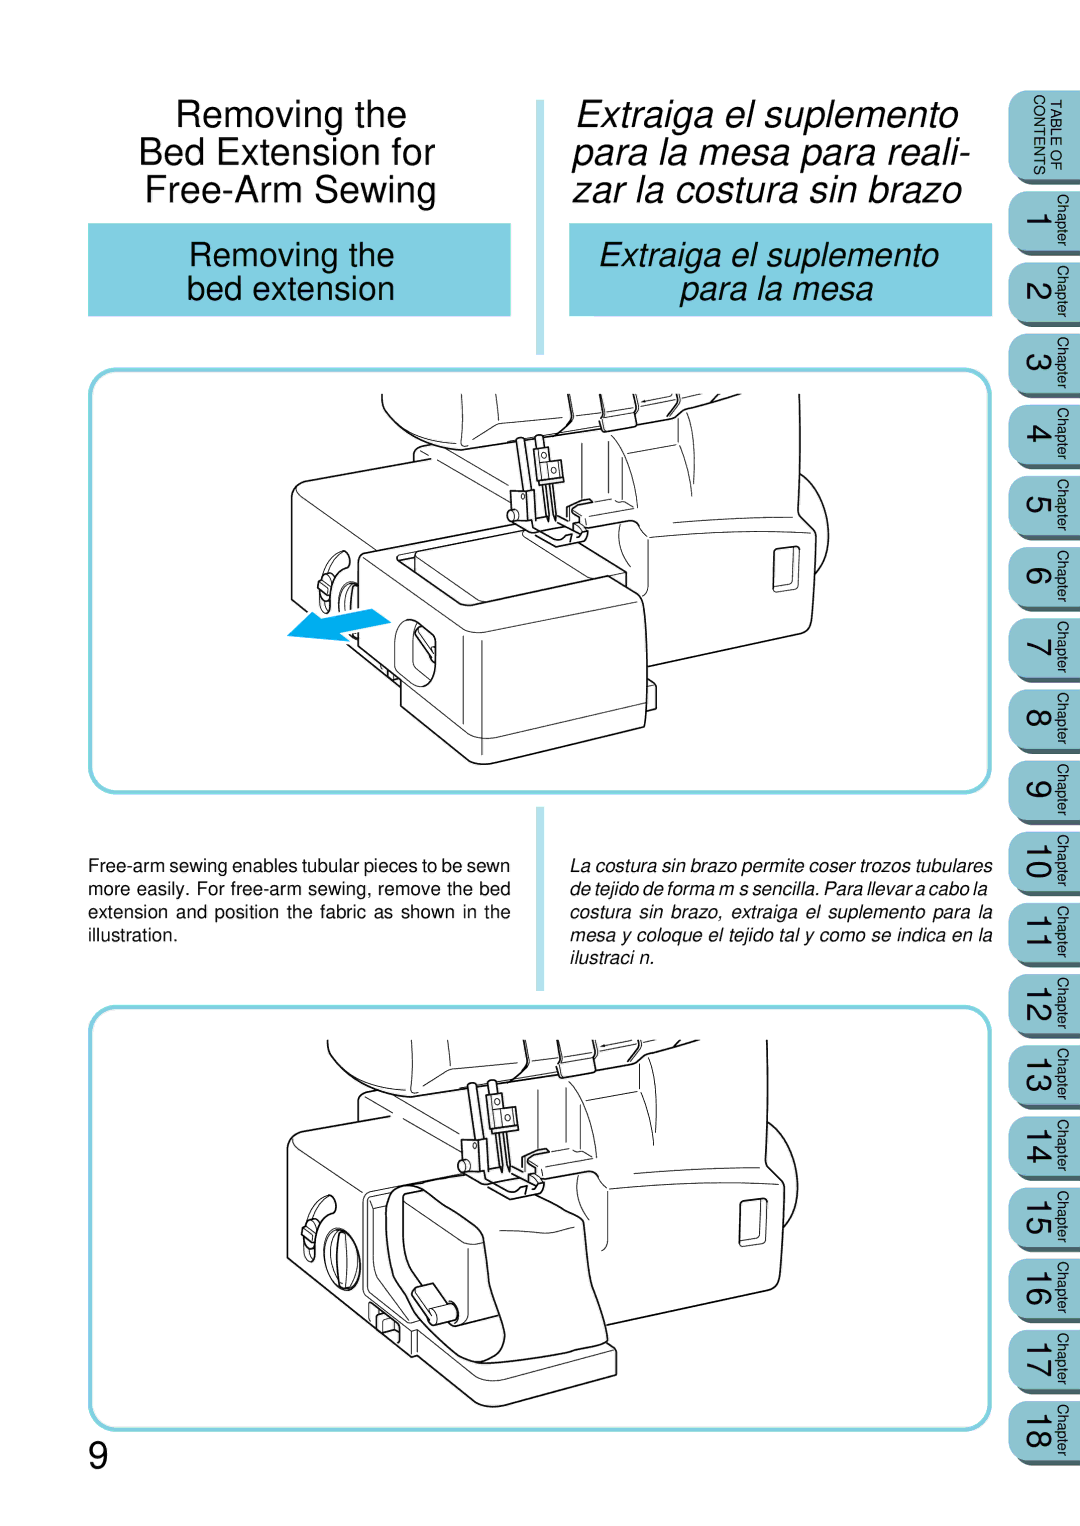 Brother UM 103D manual Removing Bed Extension for Free-Arm Sewing, Removing the bed extension 